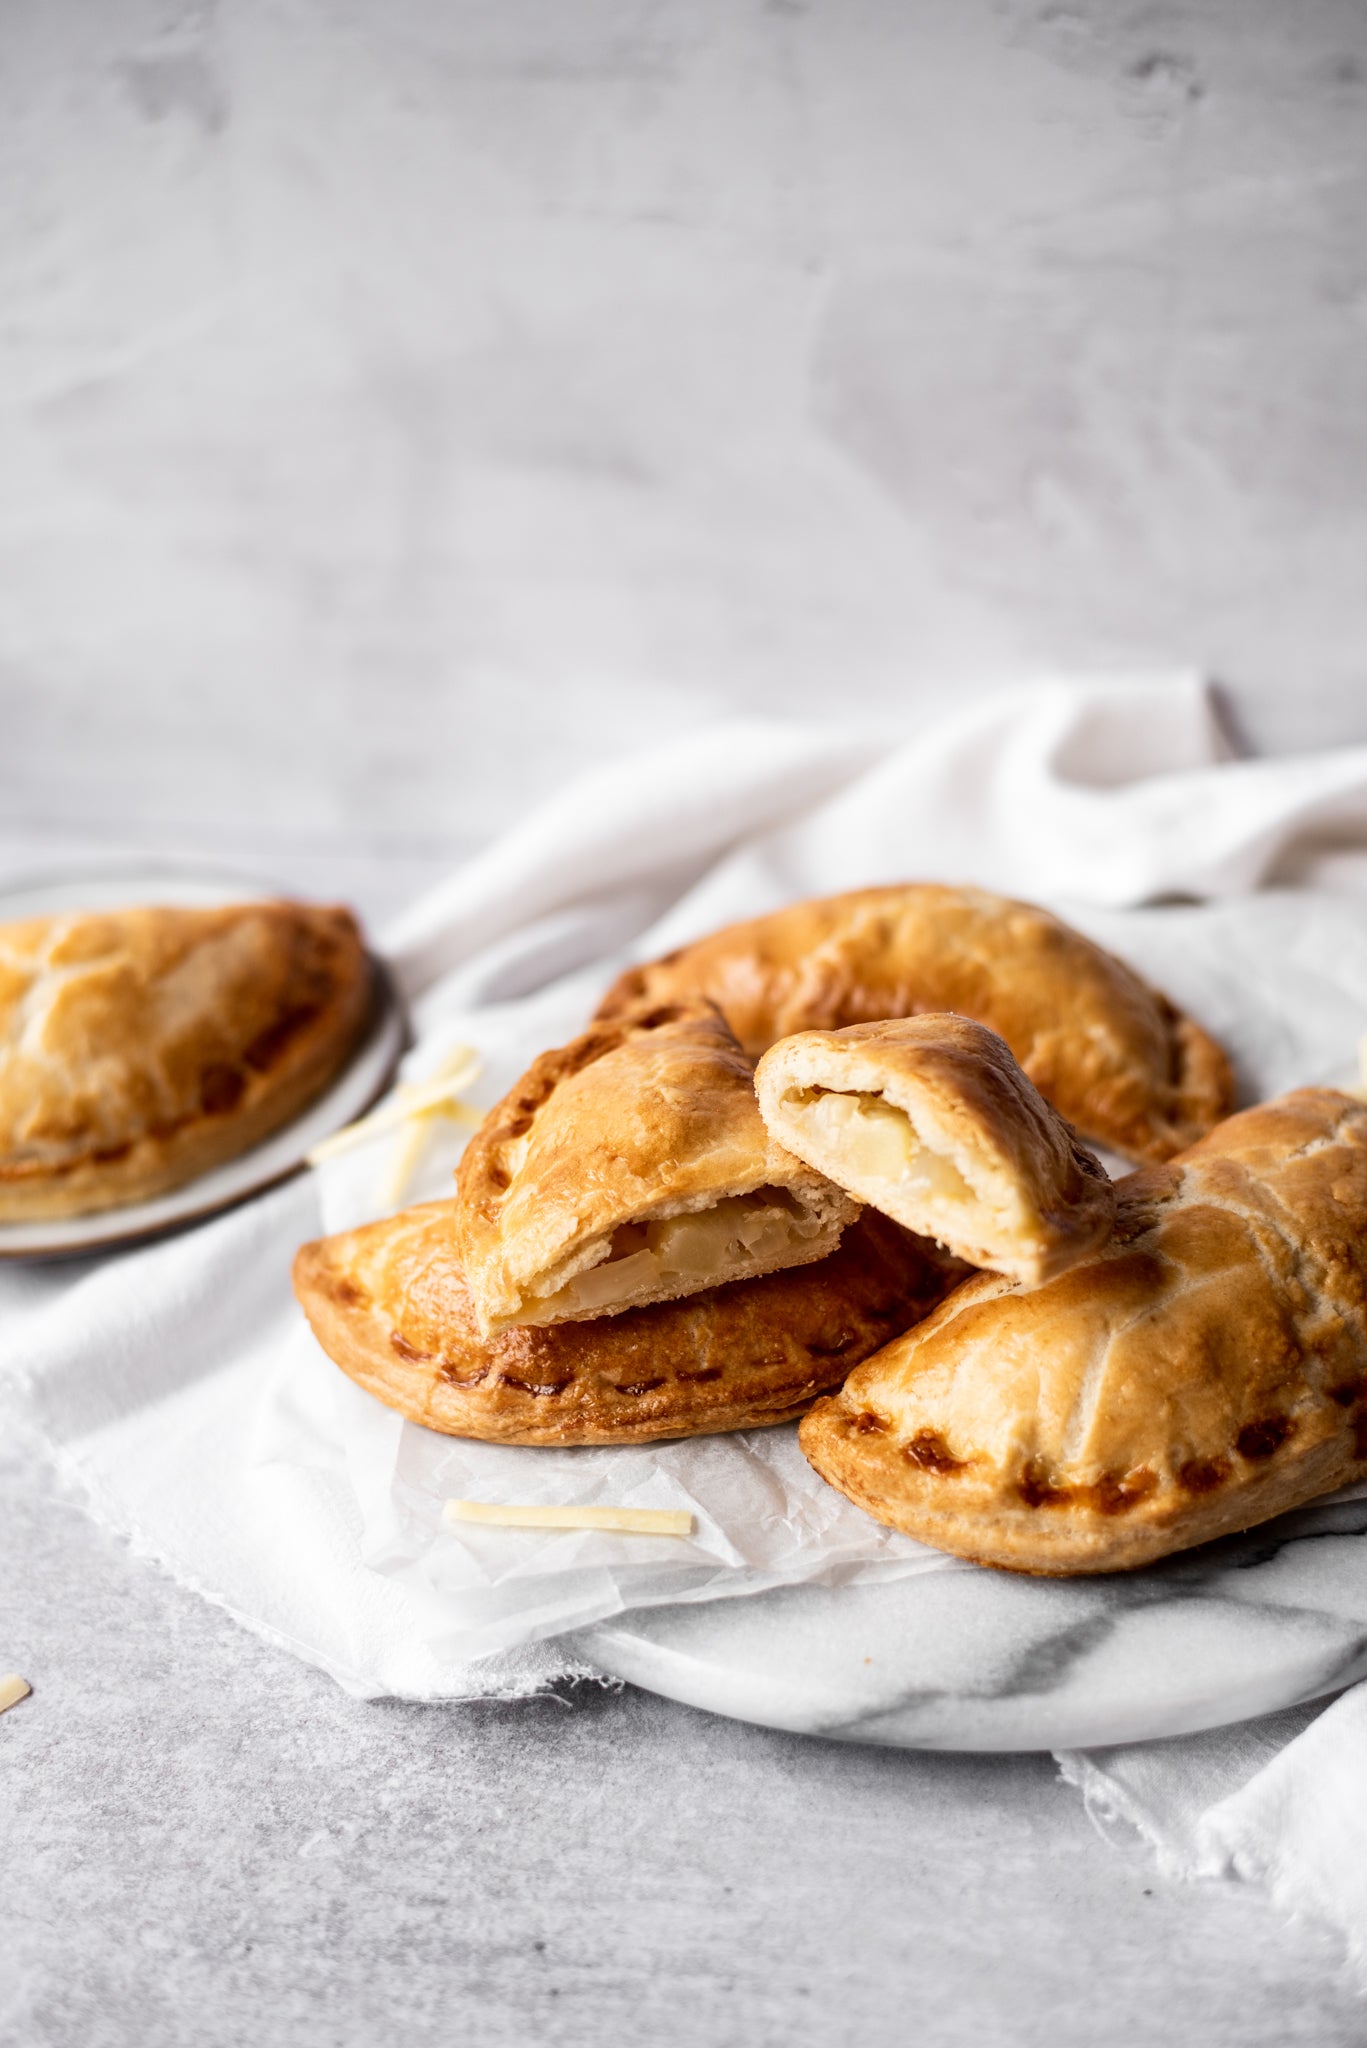 Pastie sliced open on top of pile of cheese and onion pasties